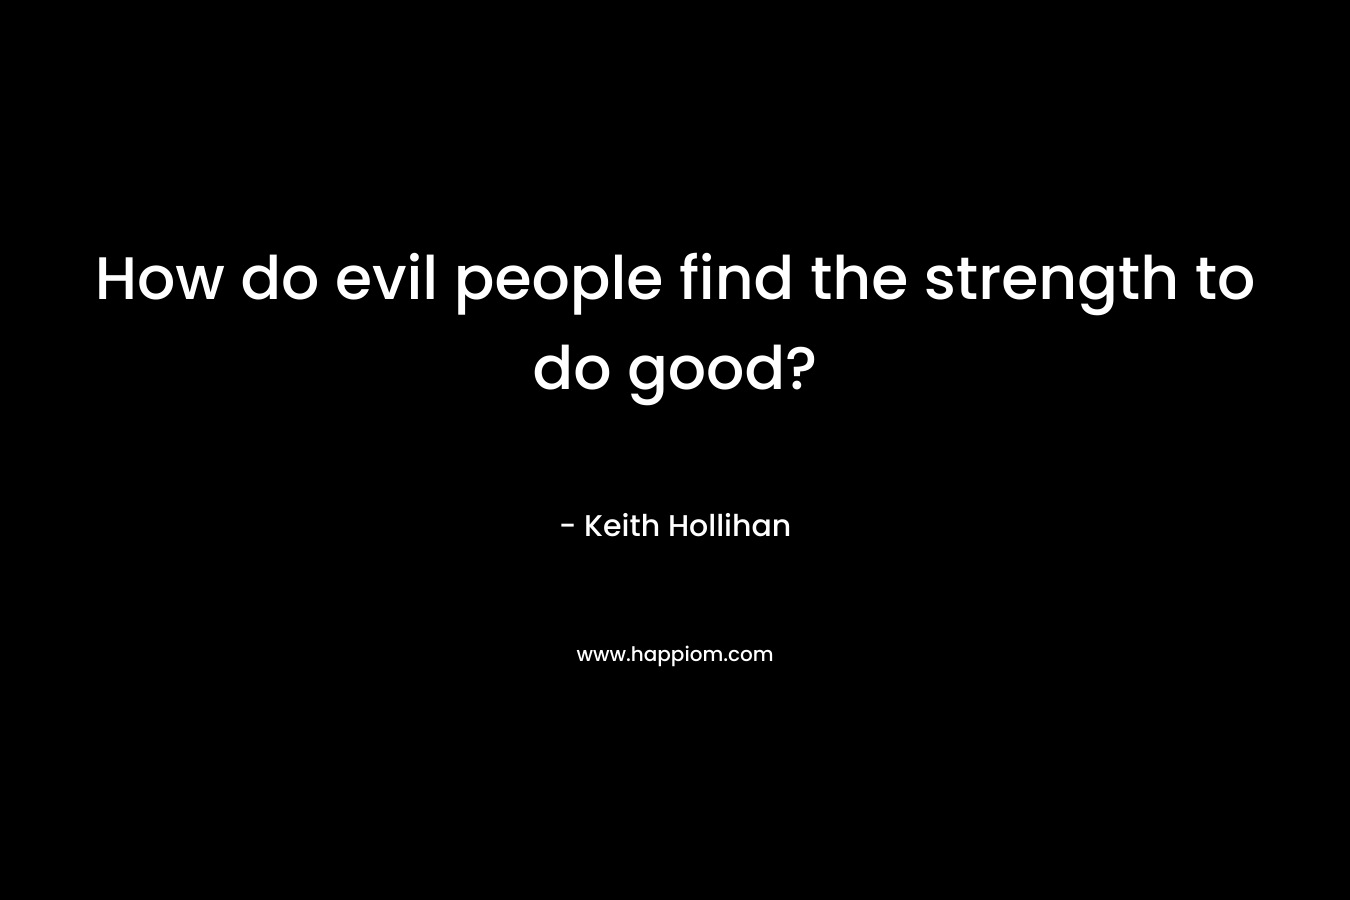 How do evil people find the strength to do good? – Keith Hollihan